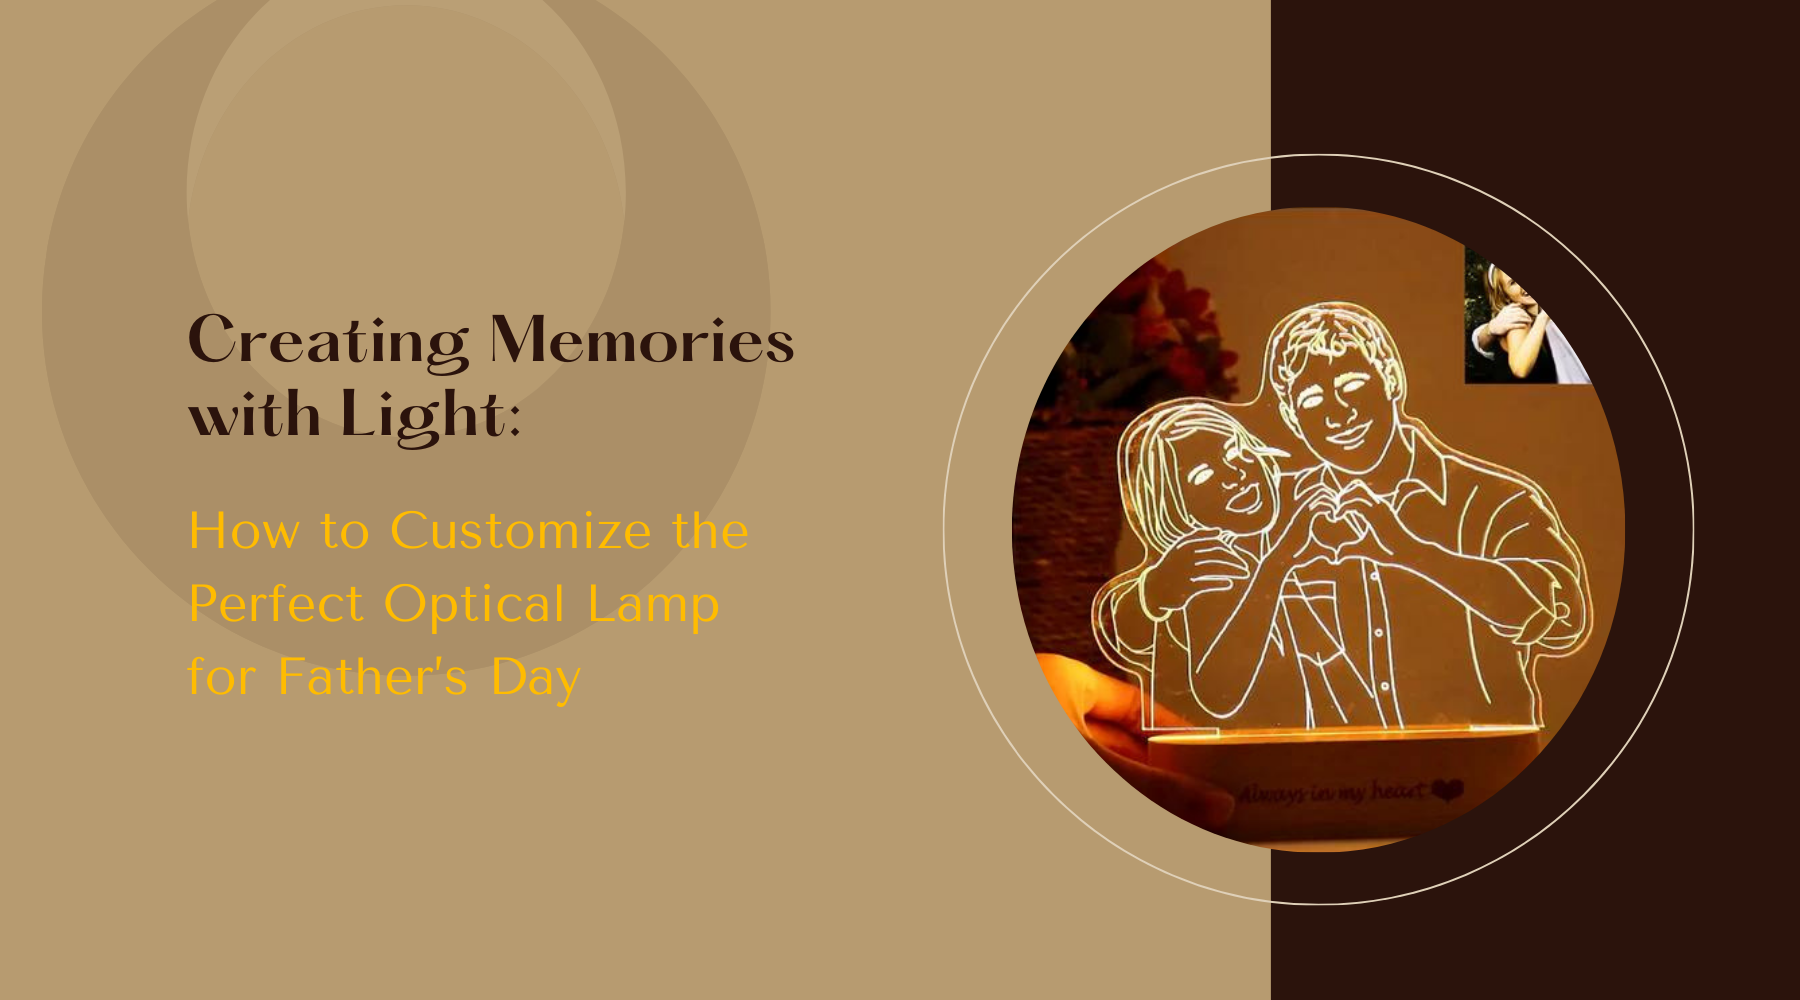 Creating Memories with Light: How to Customize the Perfect Optical Lamp for Father’s Day